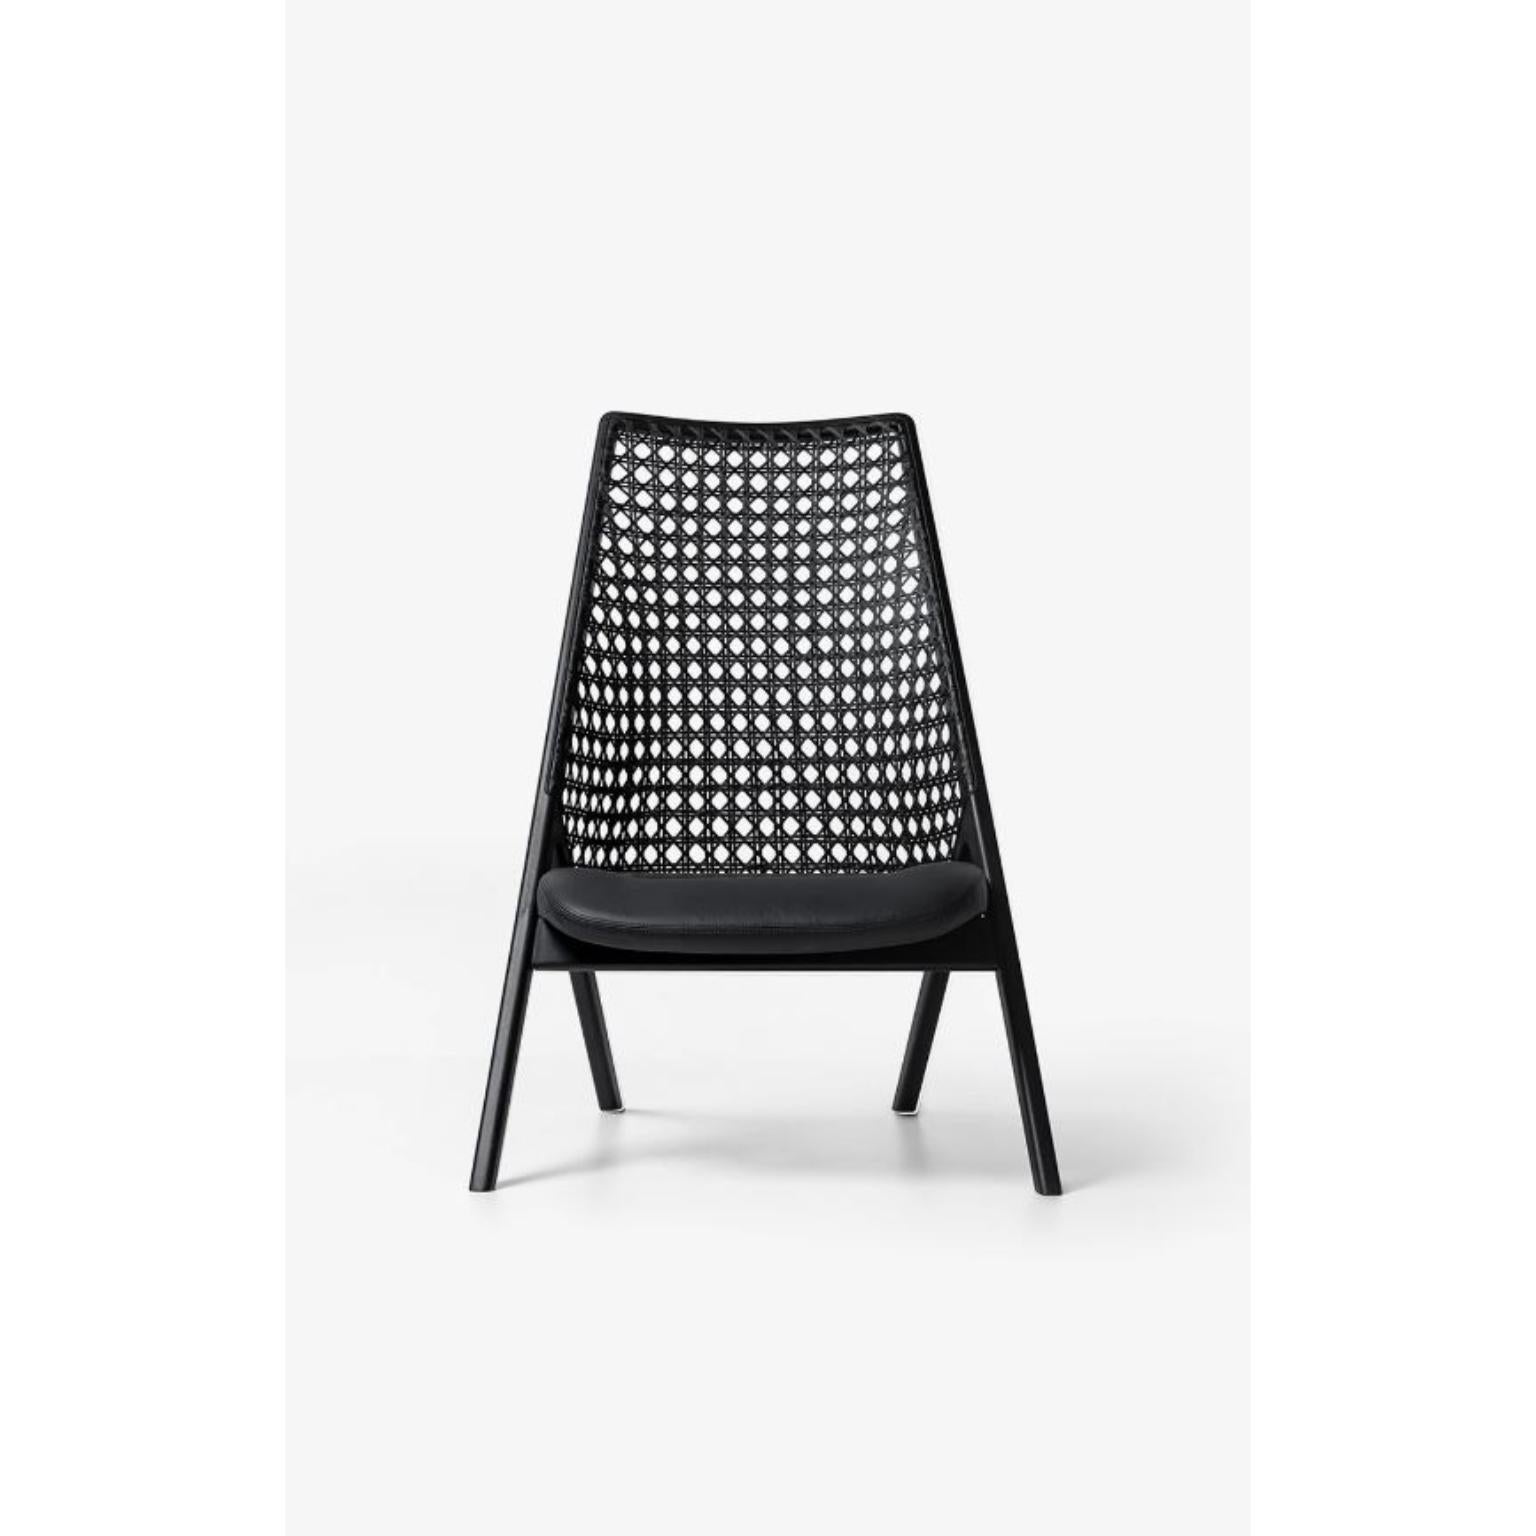 Black Tela Lounge Chair by Wentz
Dimensions: D 75 x W 75 x H 101 cm
Materials: Tauari Wood, Cotton Weave, Plywood, Upholstery.
Weight: 7,9kg / 17, 5 lbs

The Tela armchair is a meeting between contemporary design and traditional Brazilian materials.